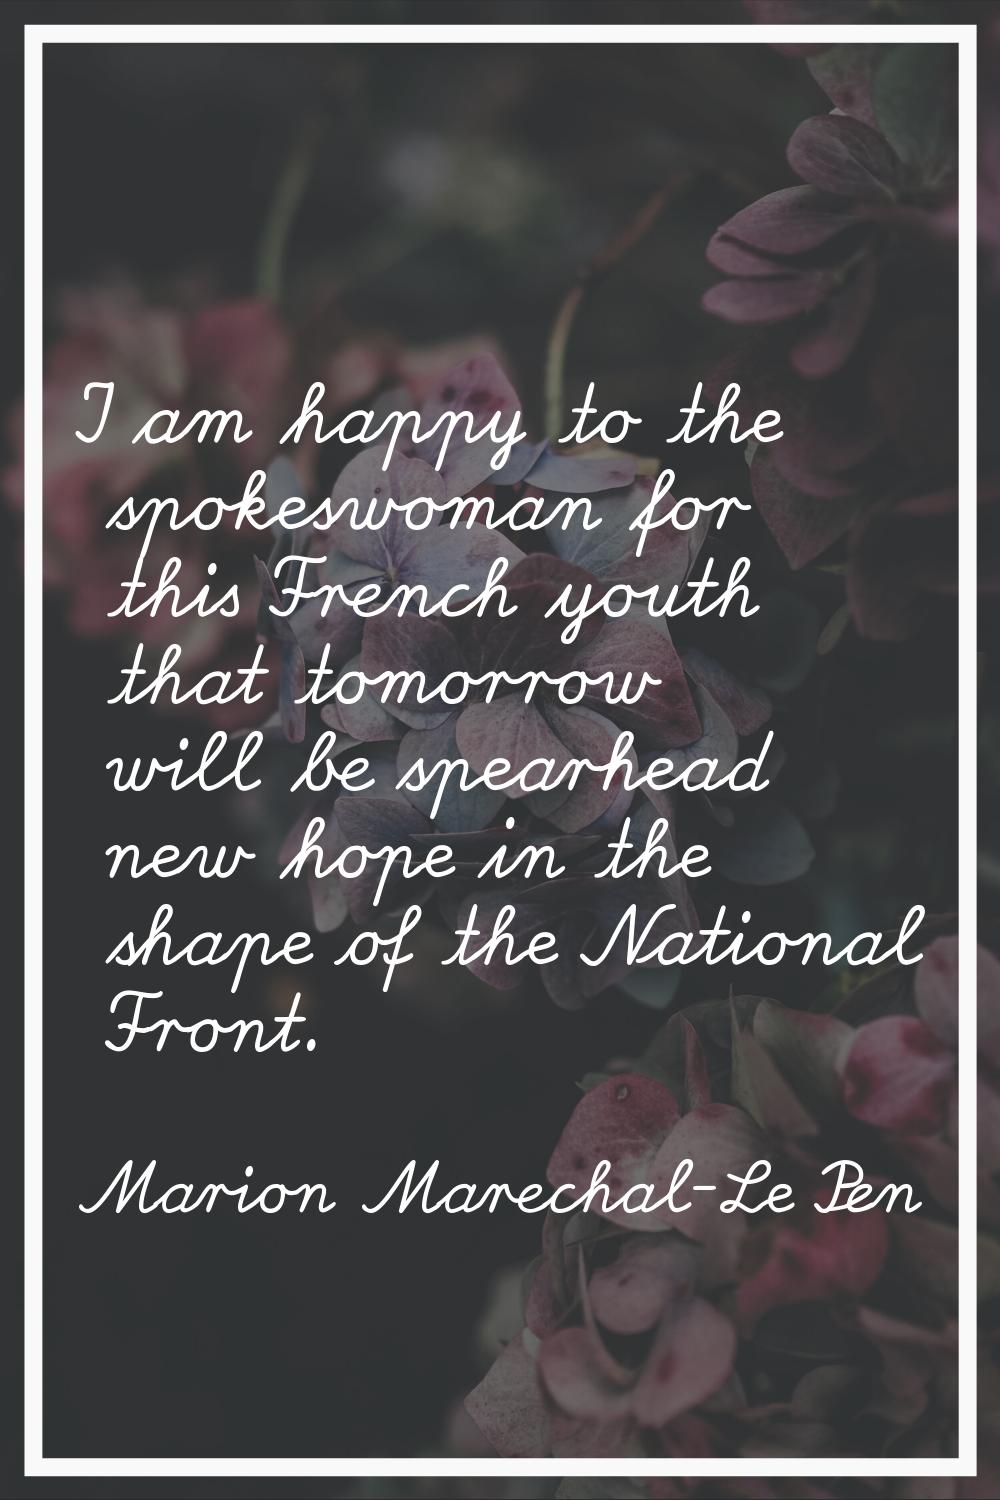 I am happy to the spokeswoman for this French youth that tomorrow will be spearhead new hope in the